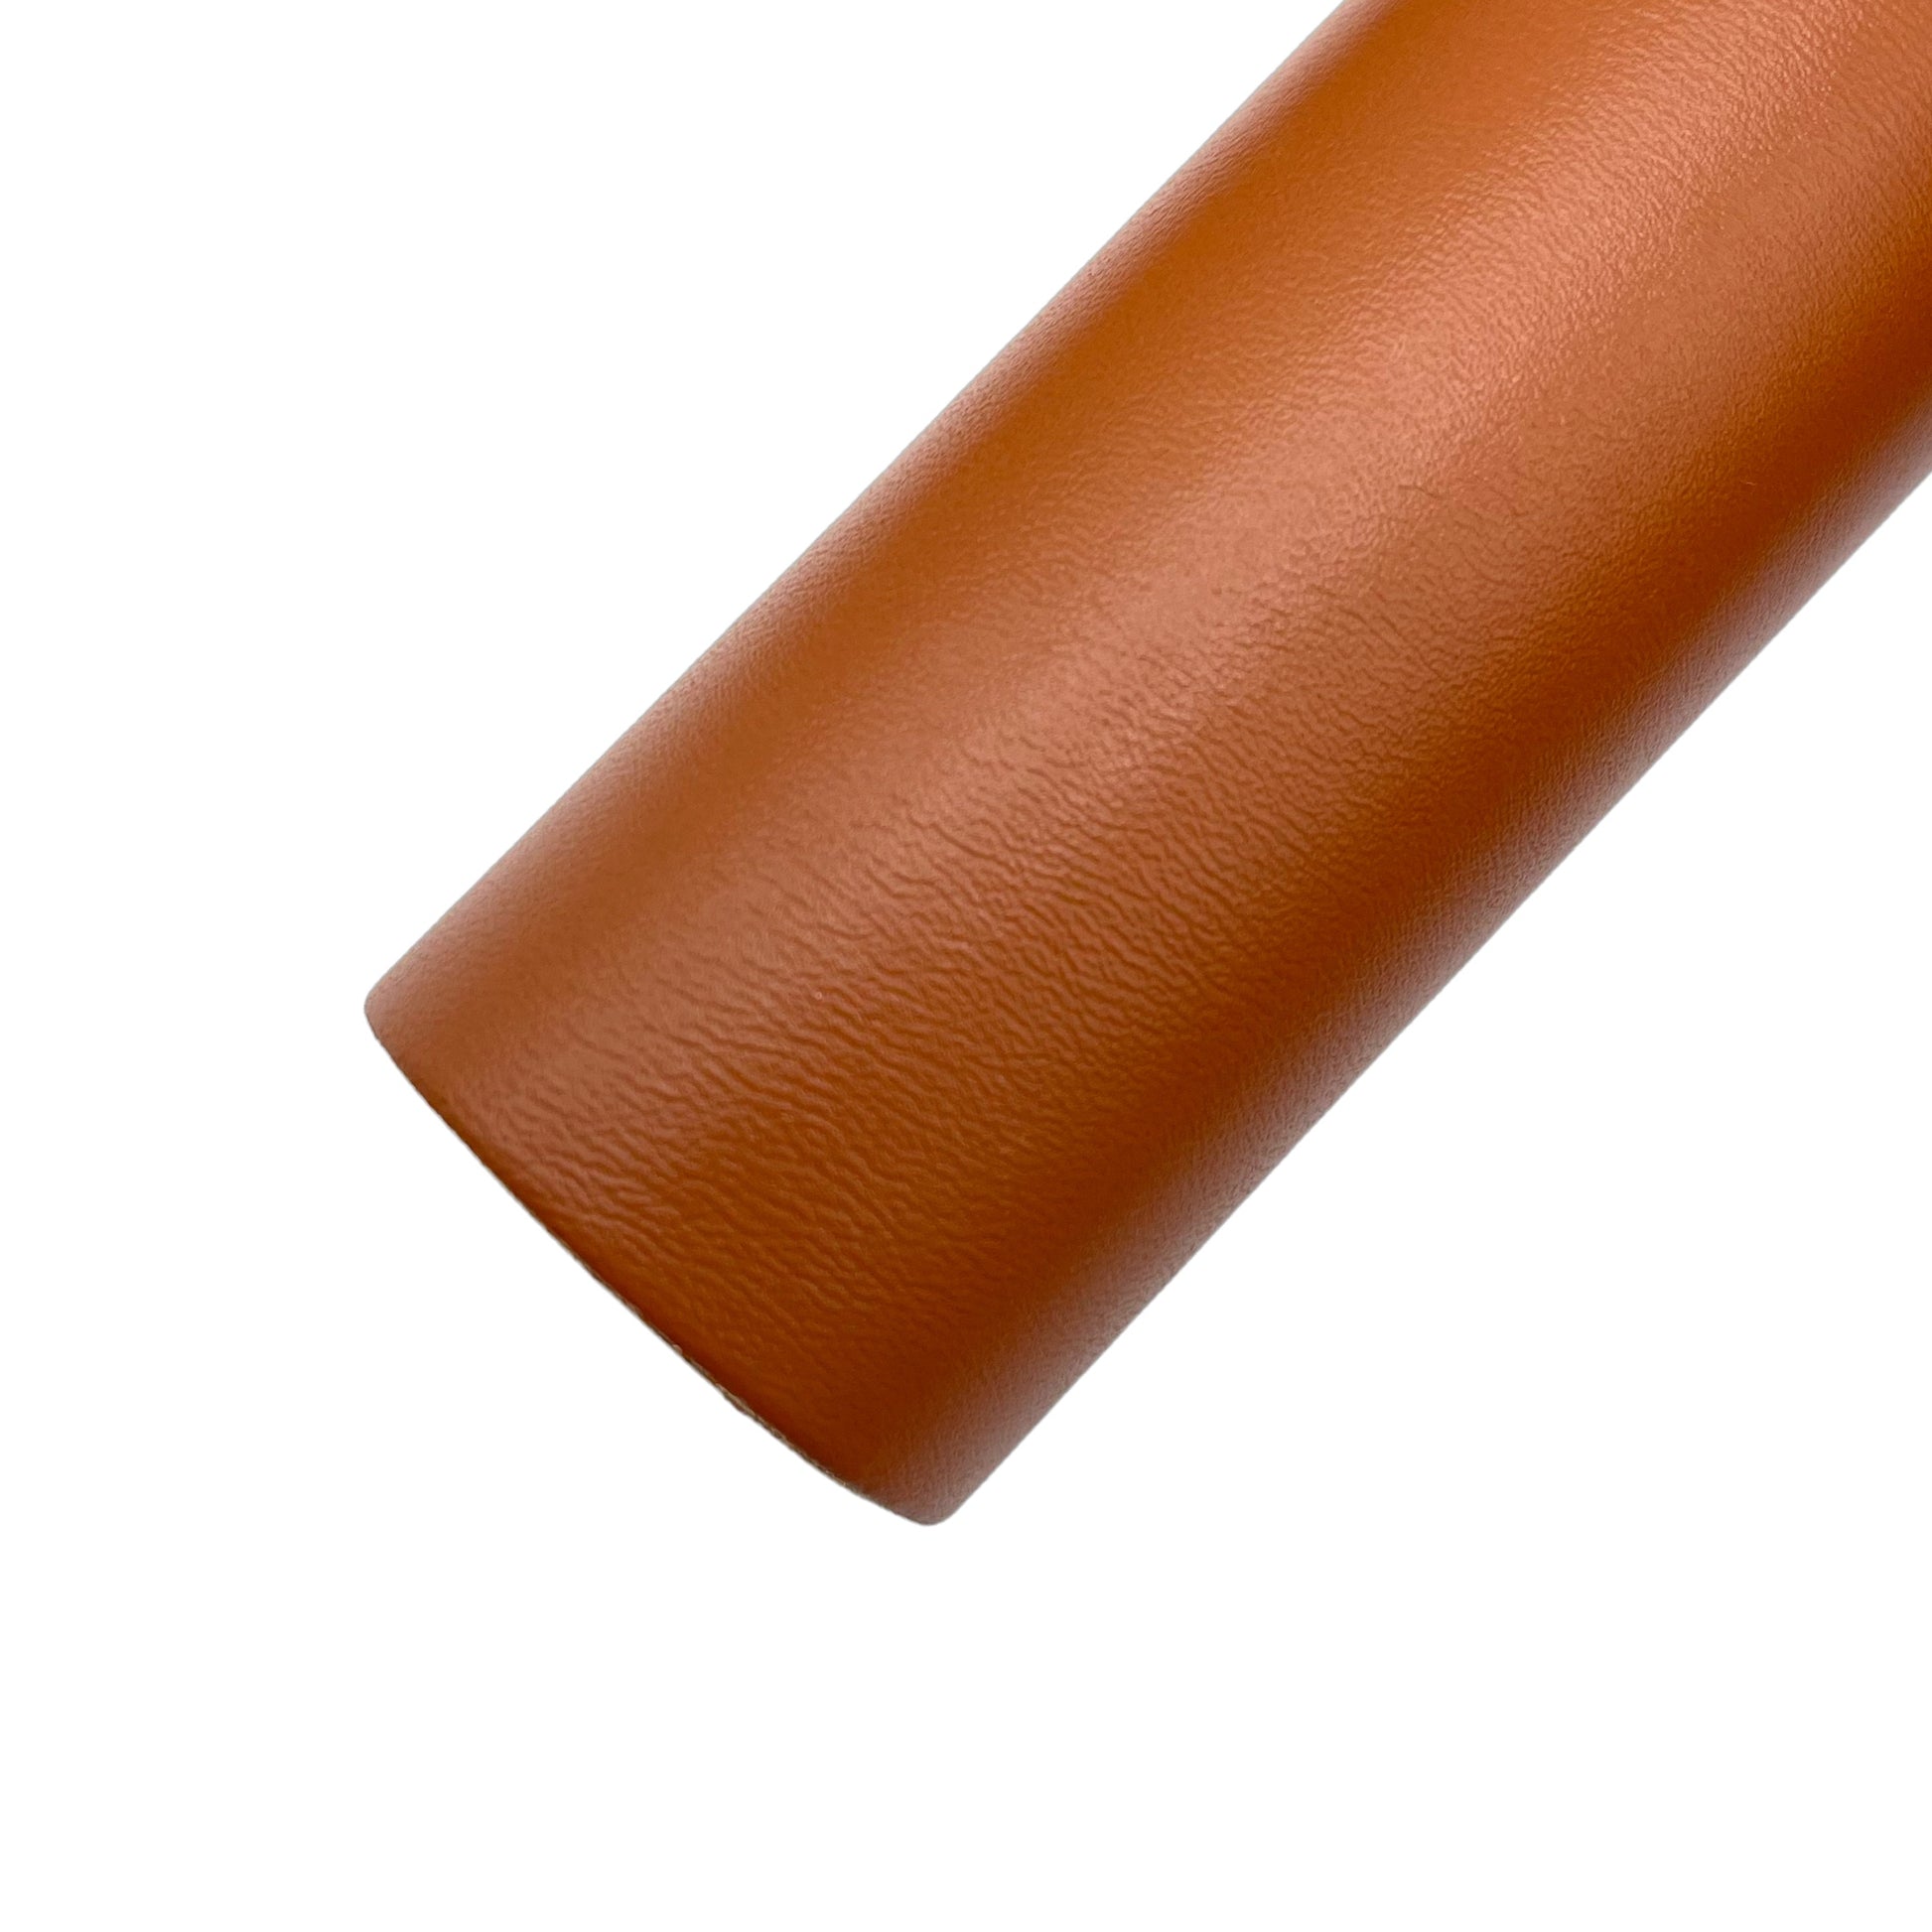 Rolled smooth rust chestnut brown faux leather sheet